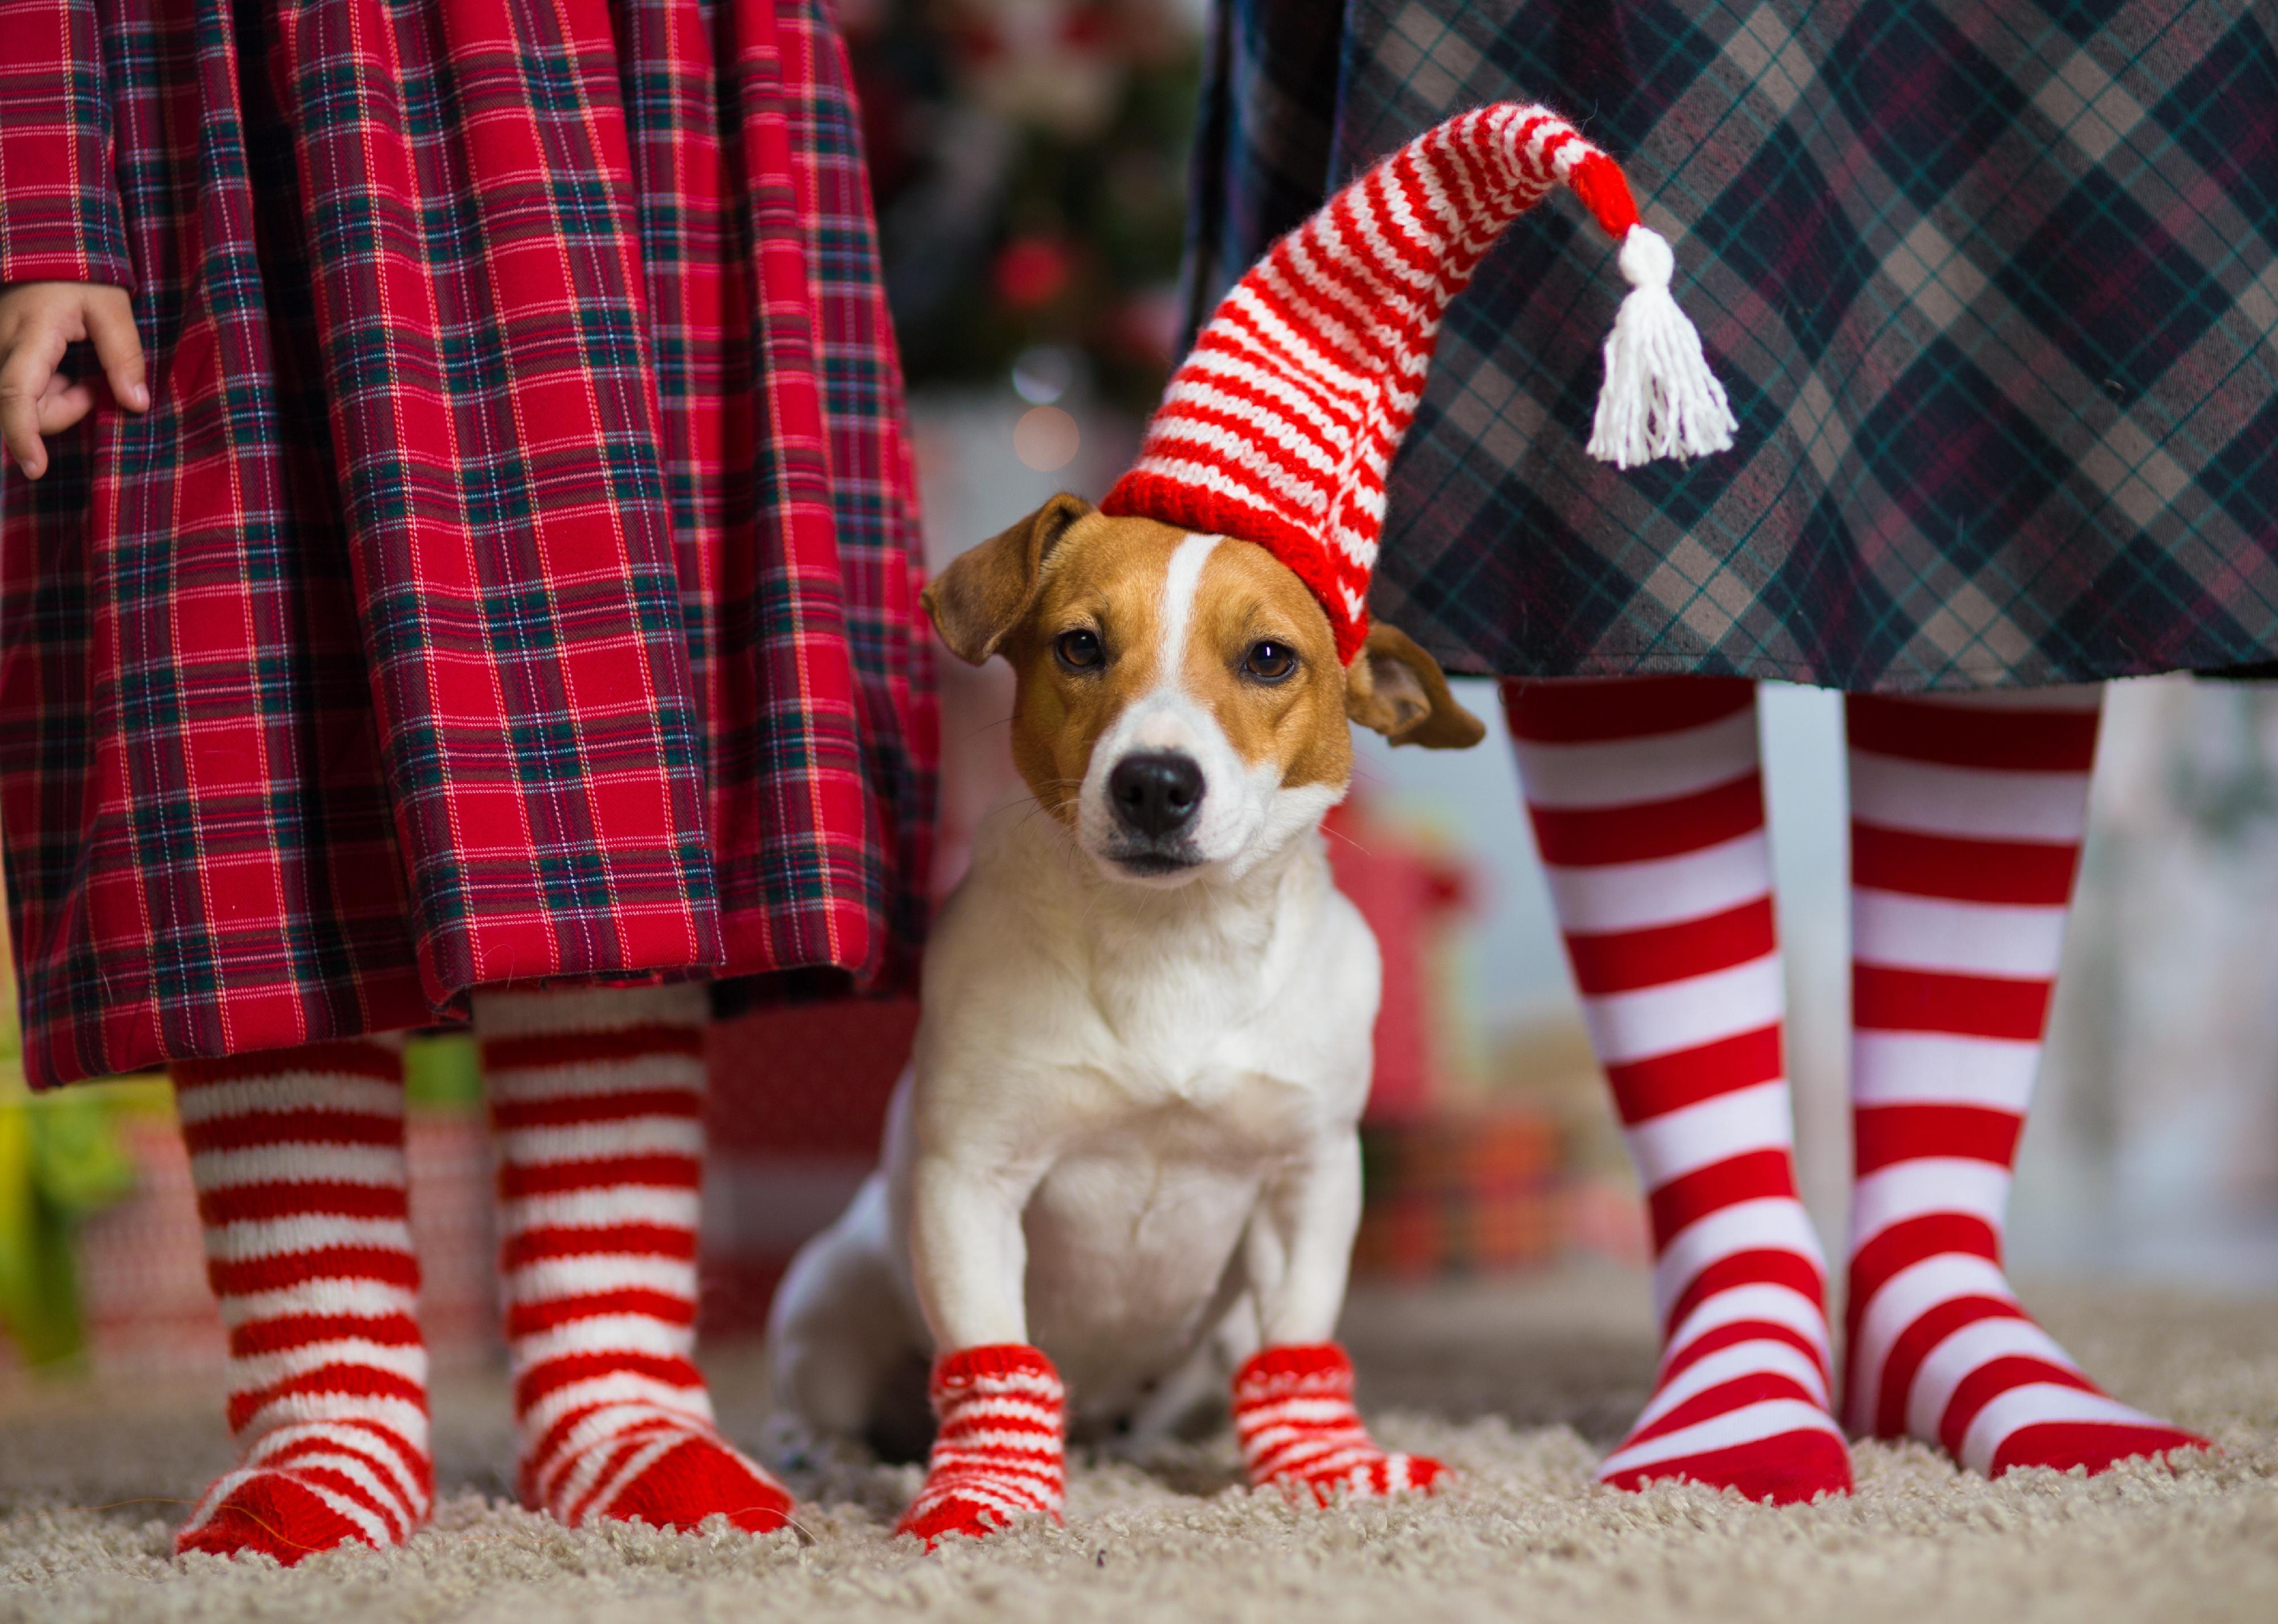 A Jack Russell Terrier in betwee two kids, all in red and white striped socks.